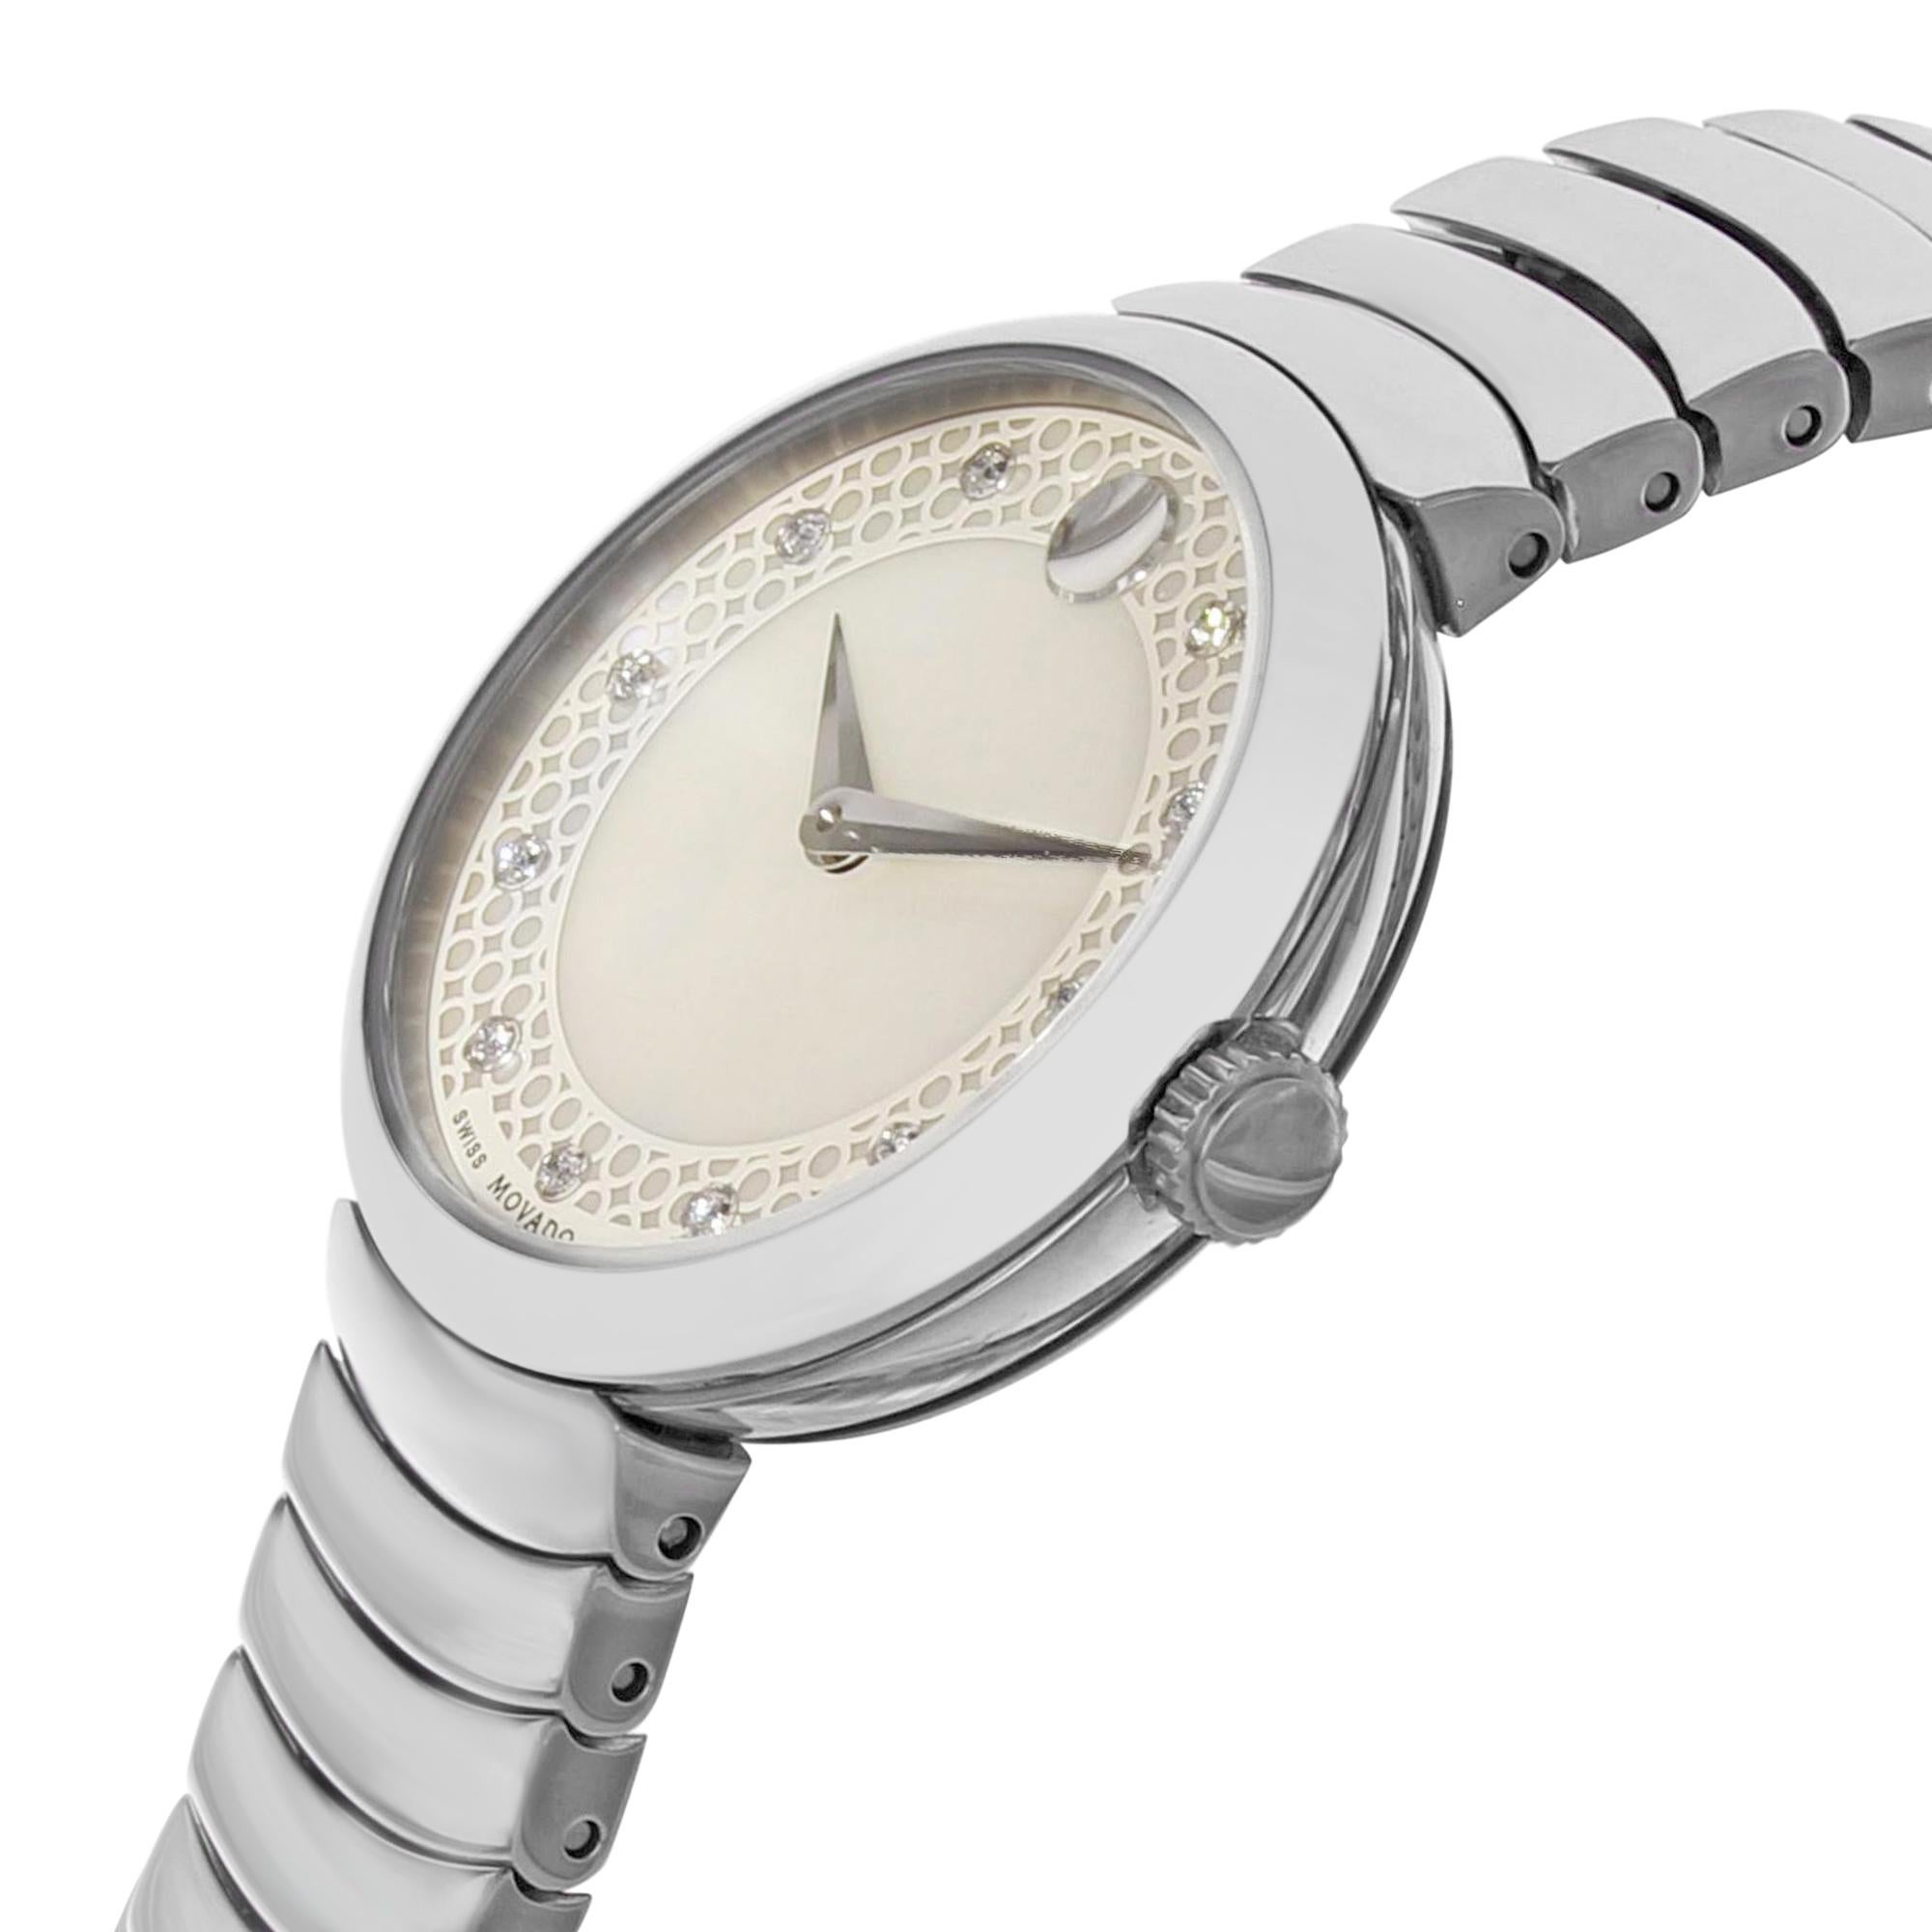 This display model Movado Myla 0607044 is a beautiful Ladies timepiece that is powered by a quartz movement which is cased in a stainless steel case. It has a round shape face, diamonds dial and has hand diamonds style markers. It is completed with